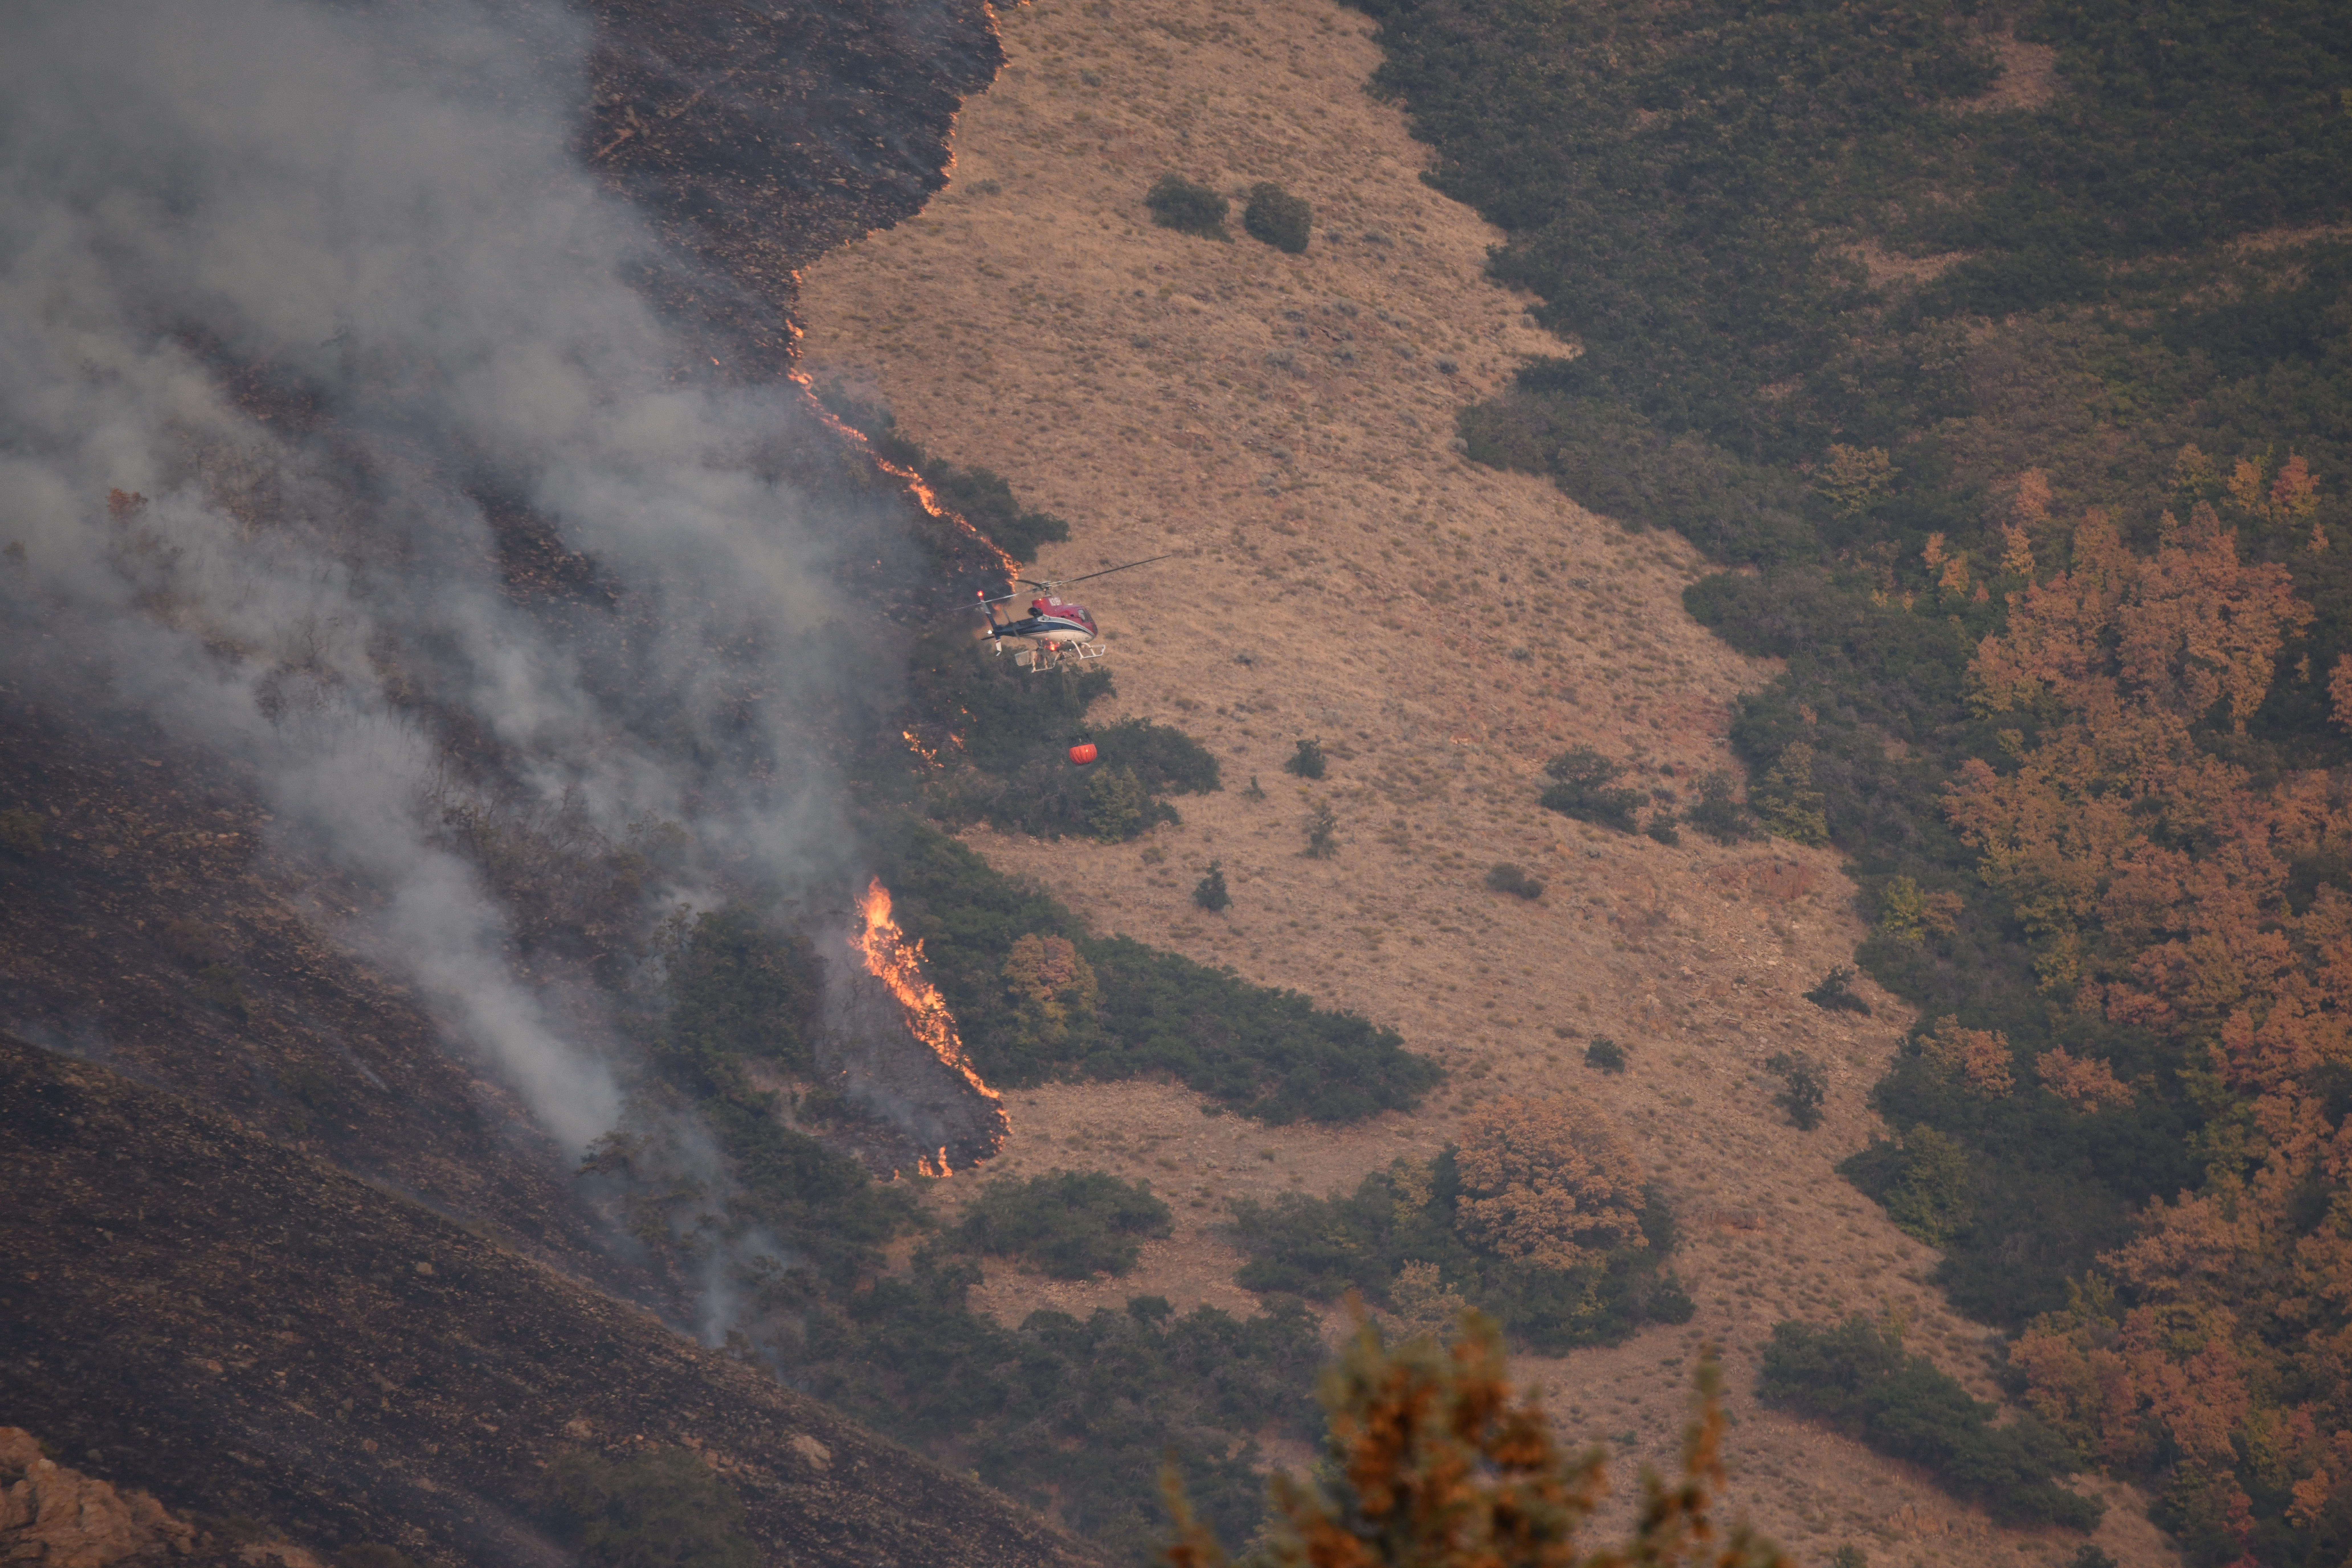 The Ether Hollow Fire, burning near Mapleton, forced evacuations on Monday, Sept. 7, 2020. Photo: Jim Miller